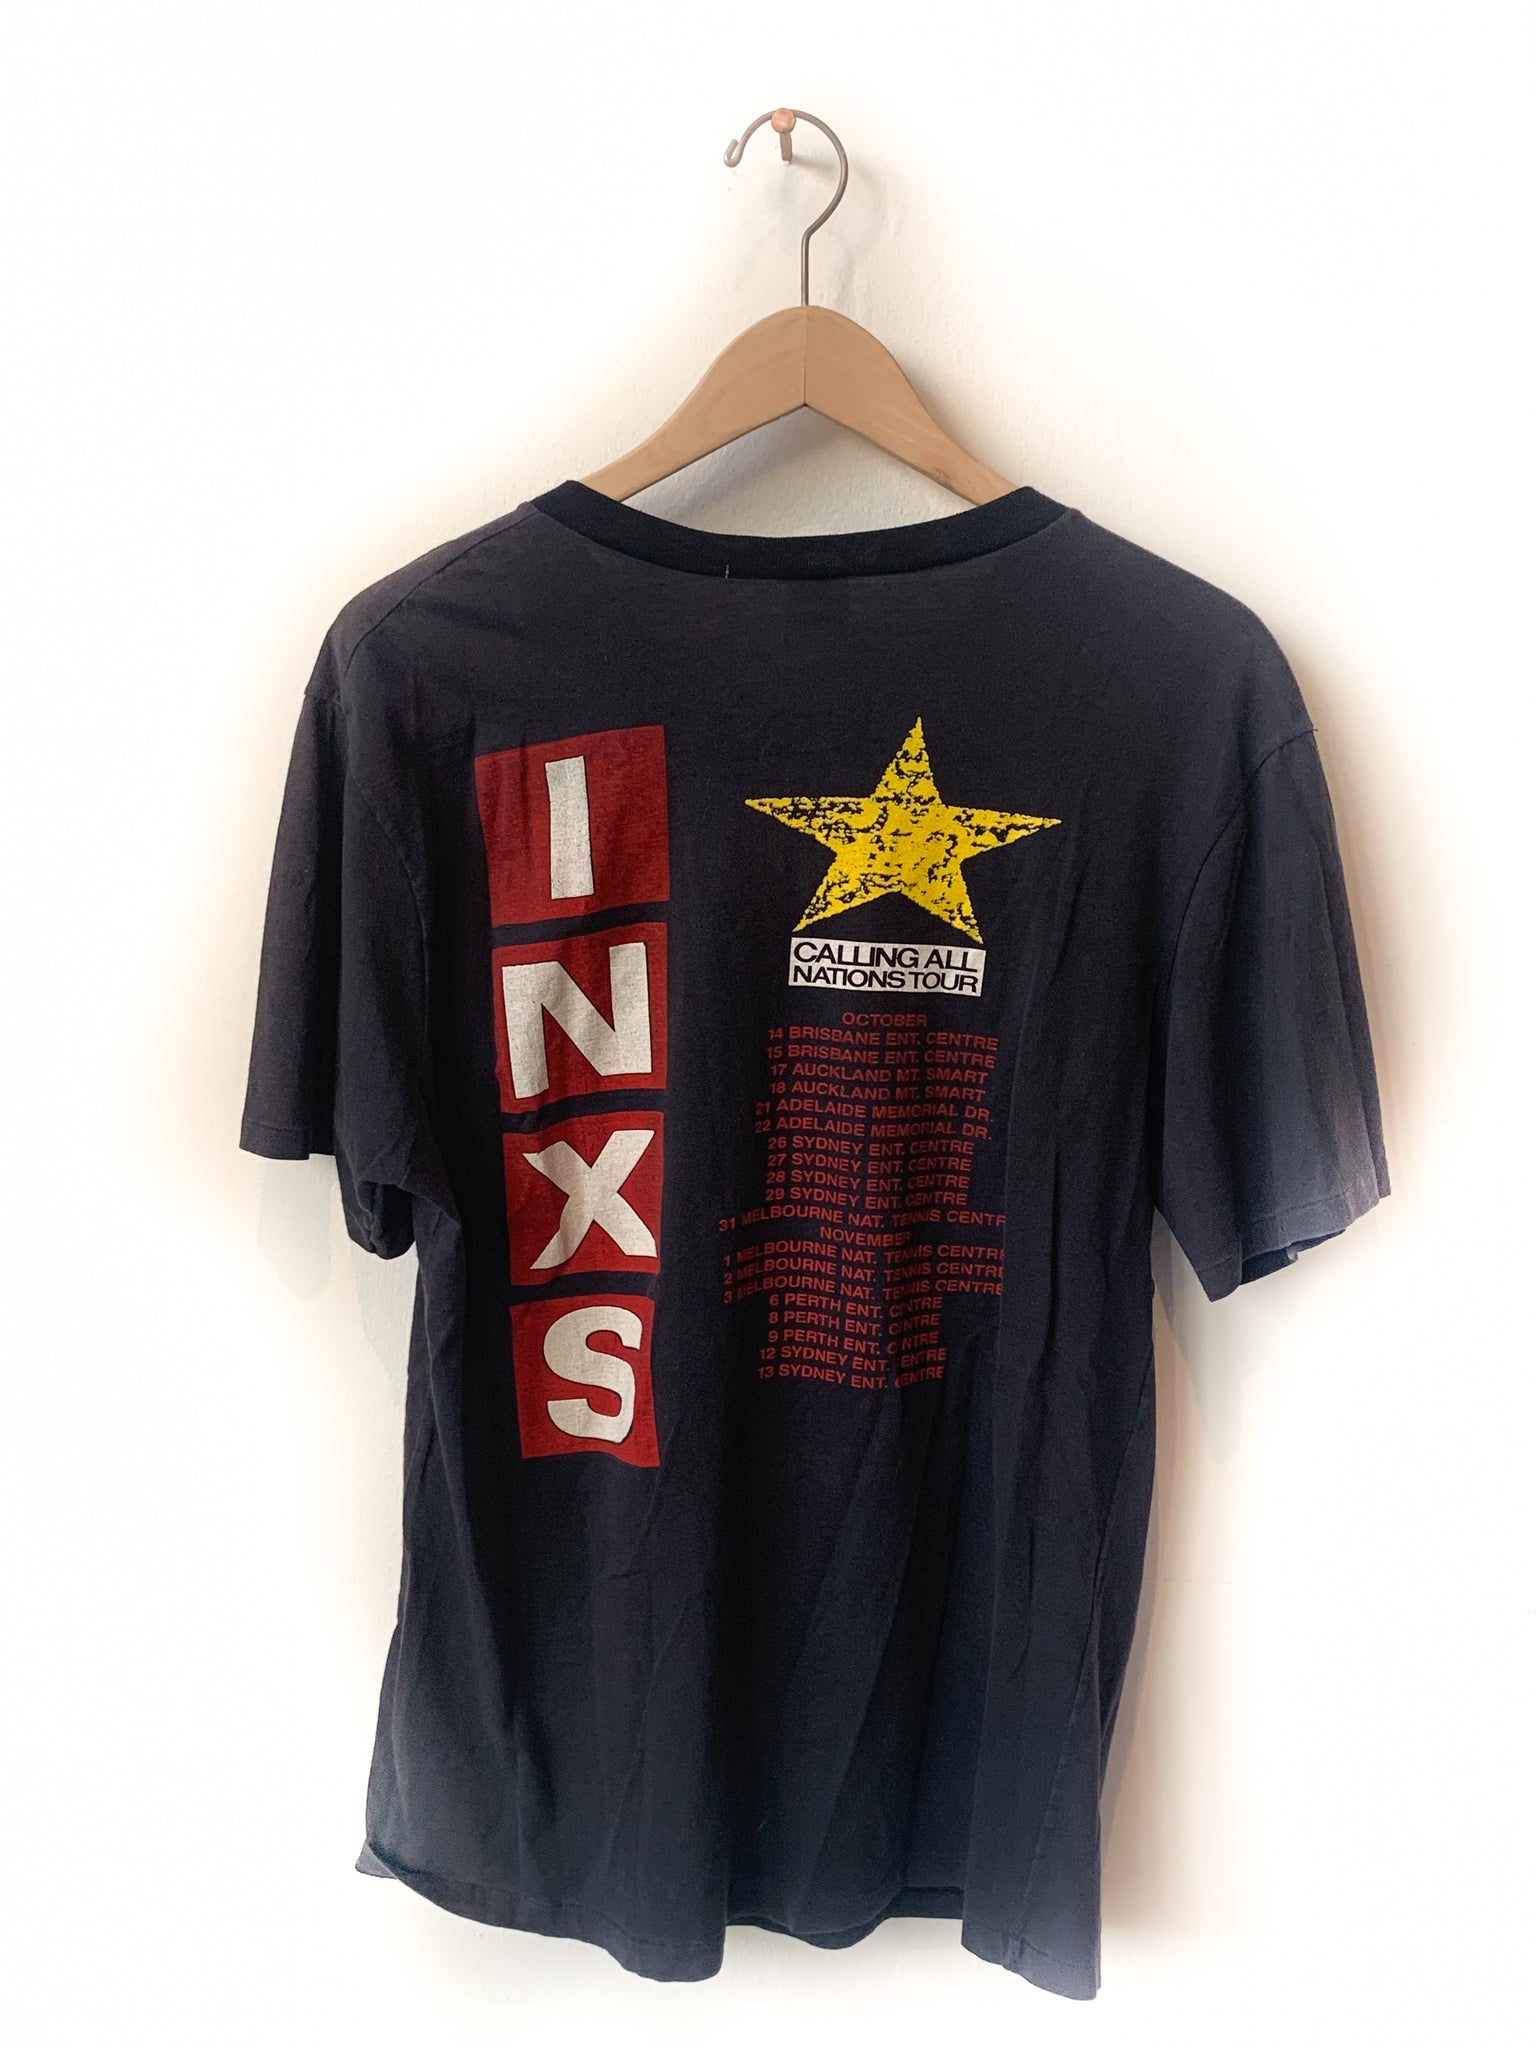 INXS 1988 TOUR CALLING ALL NATIONS